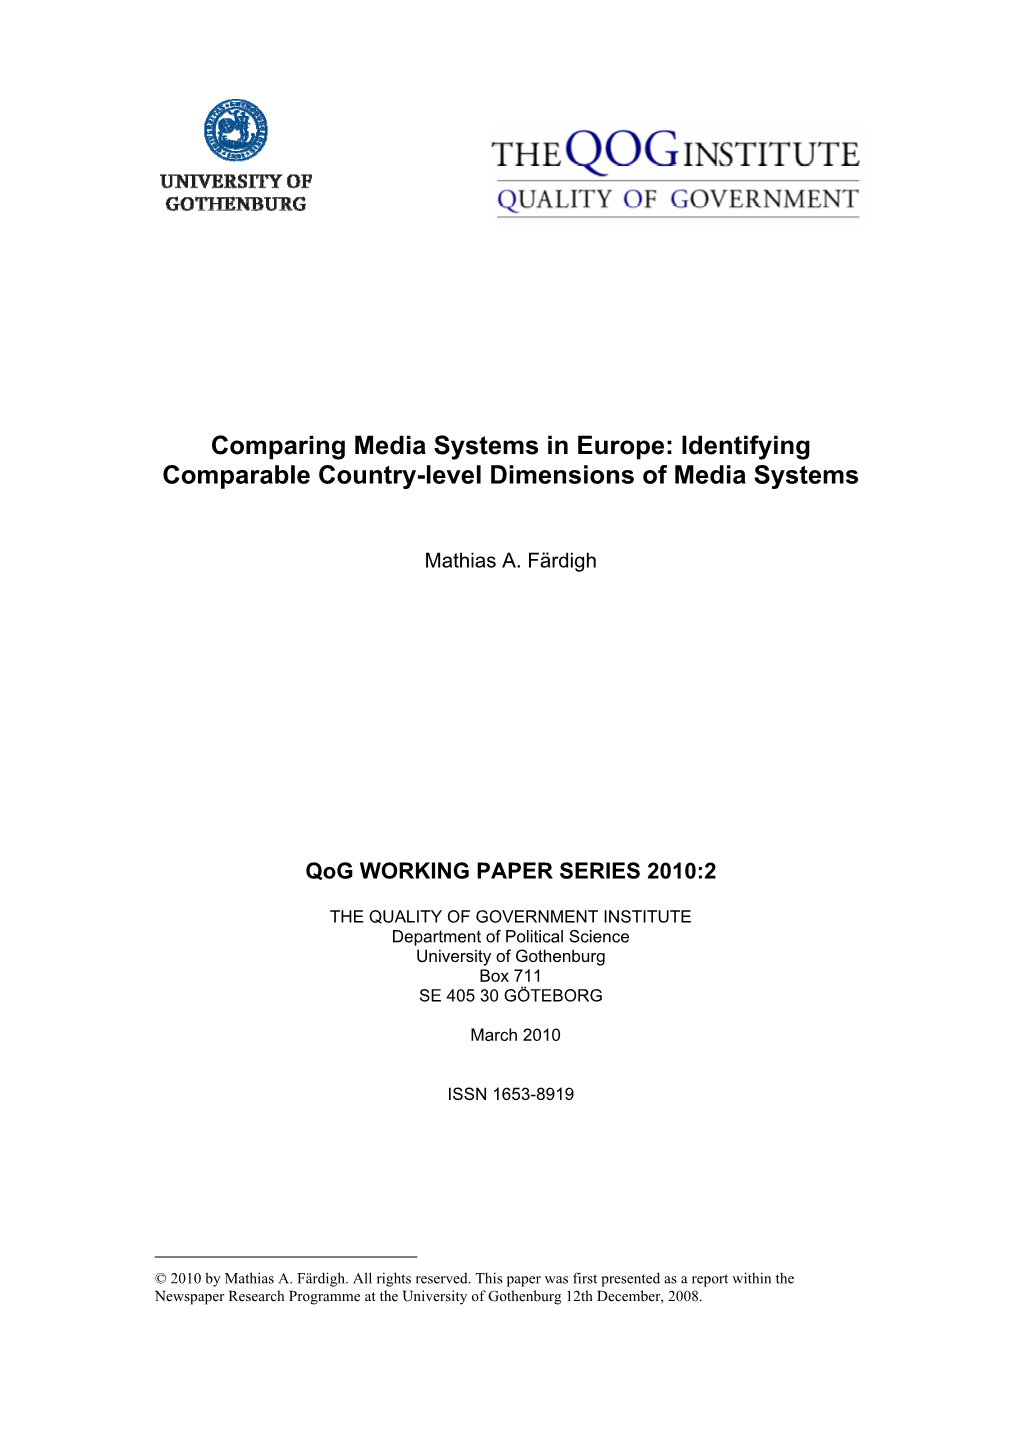 Comparing Media Systems in Europe: Identifying Comparable Country-Level Dimensions of Media Systems